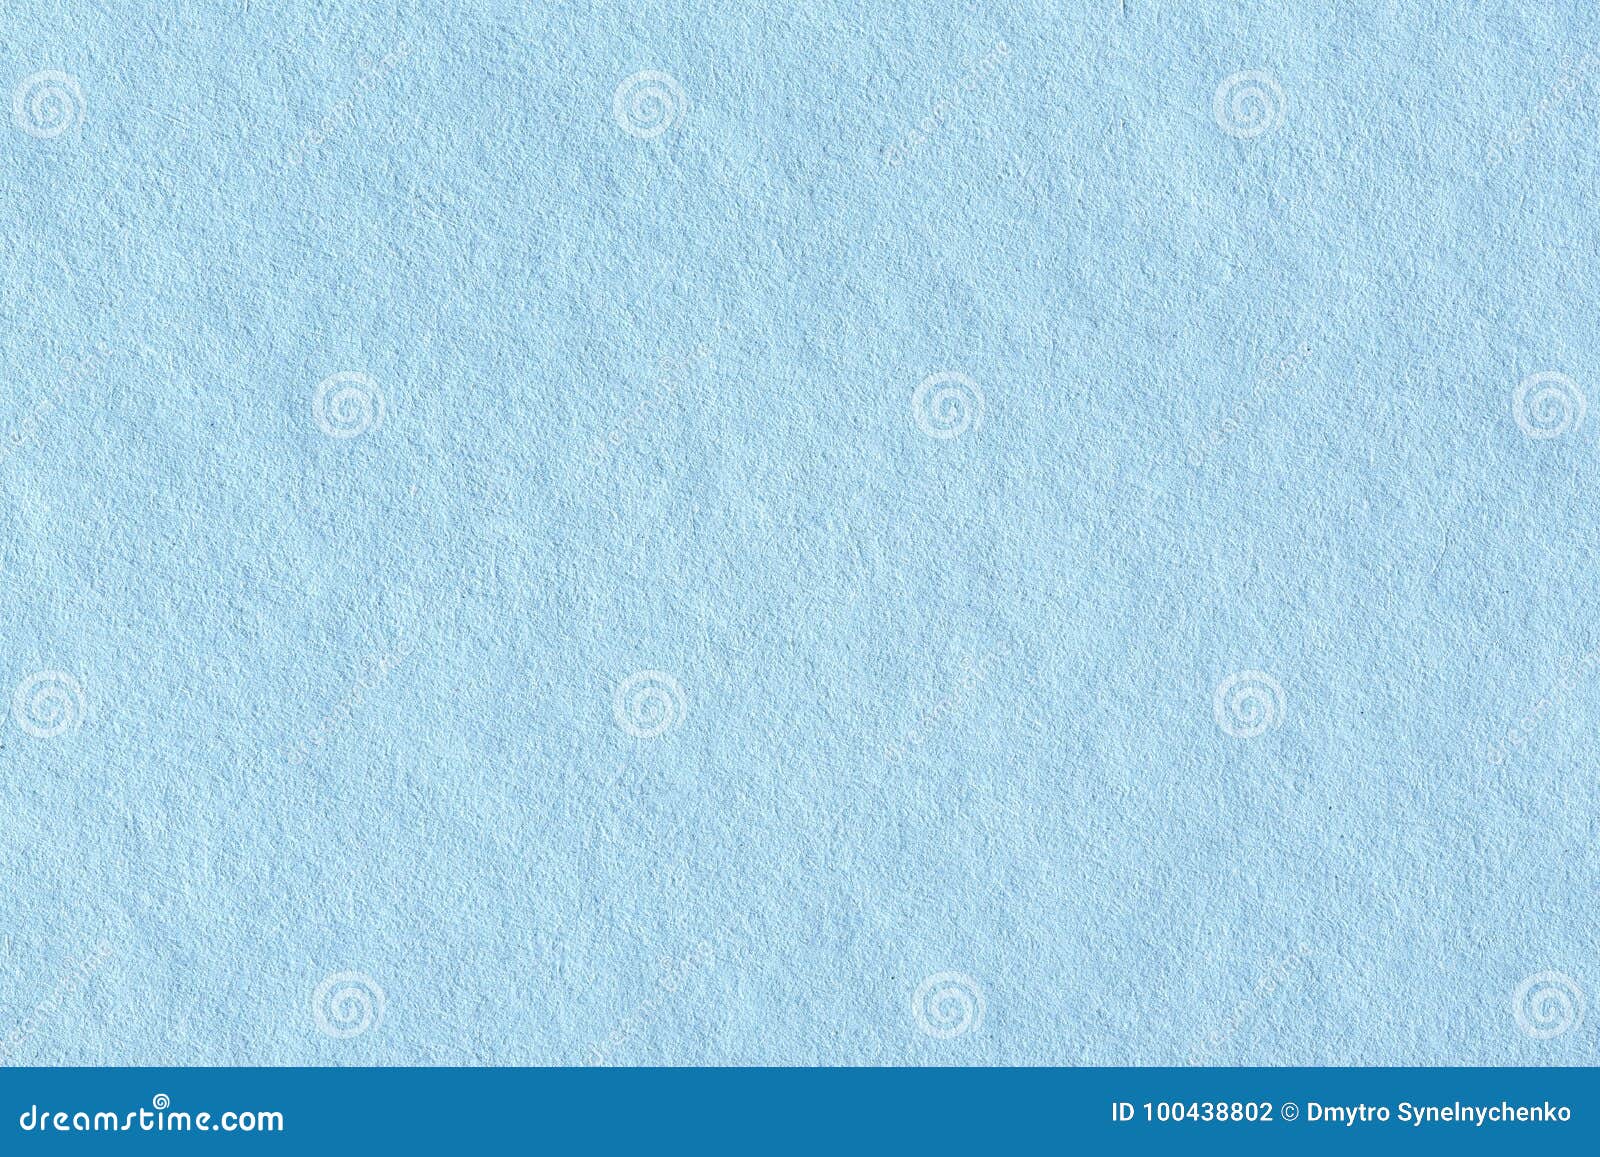 Light Blue Construction Paper Stock Photo, Picture and Royalty Free Image.  Image 14249313.